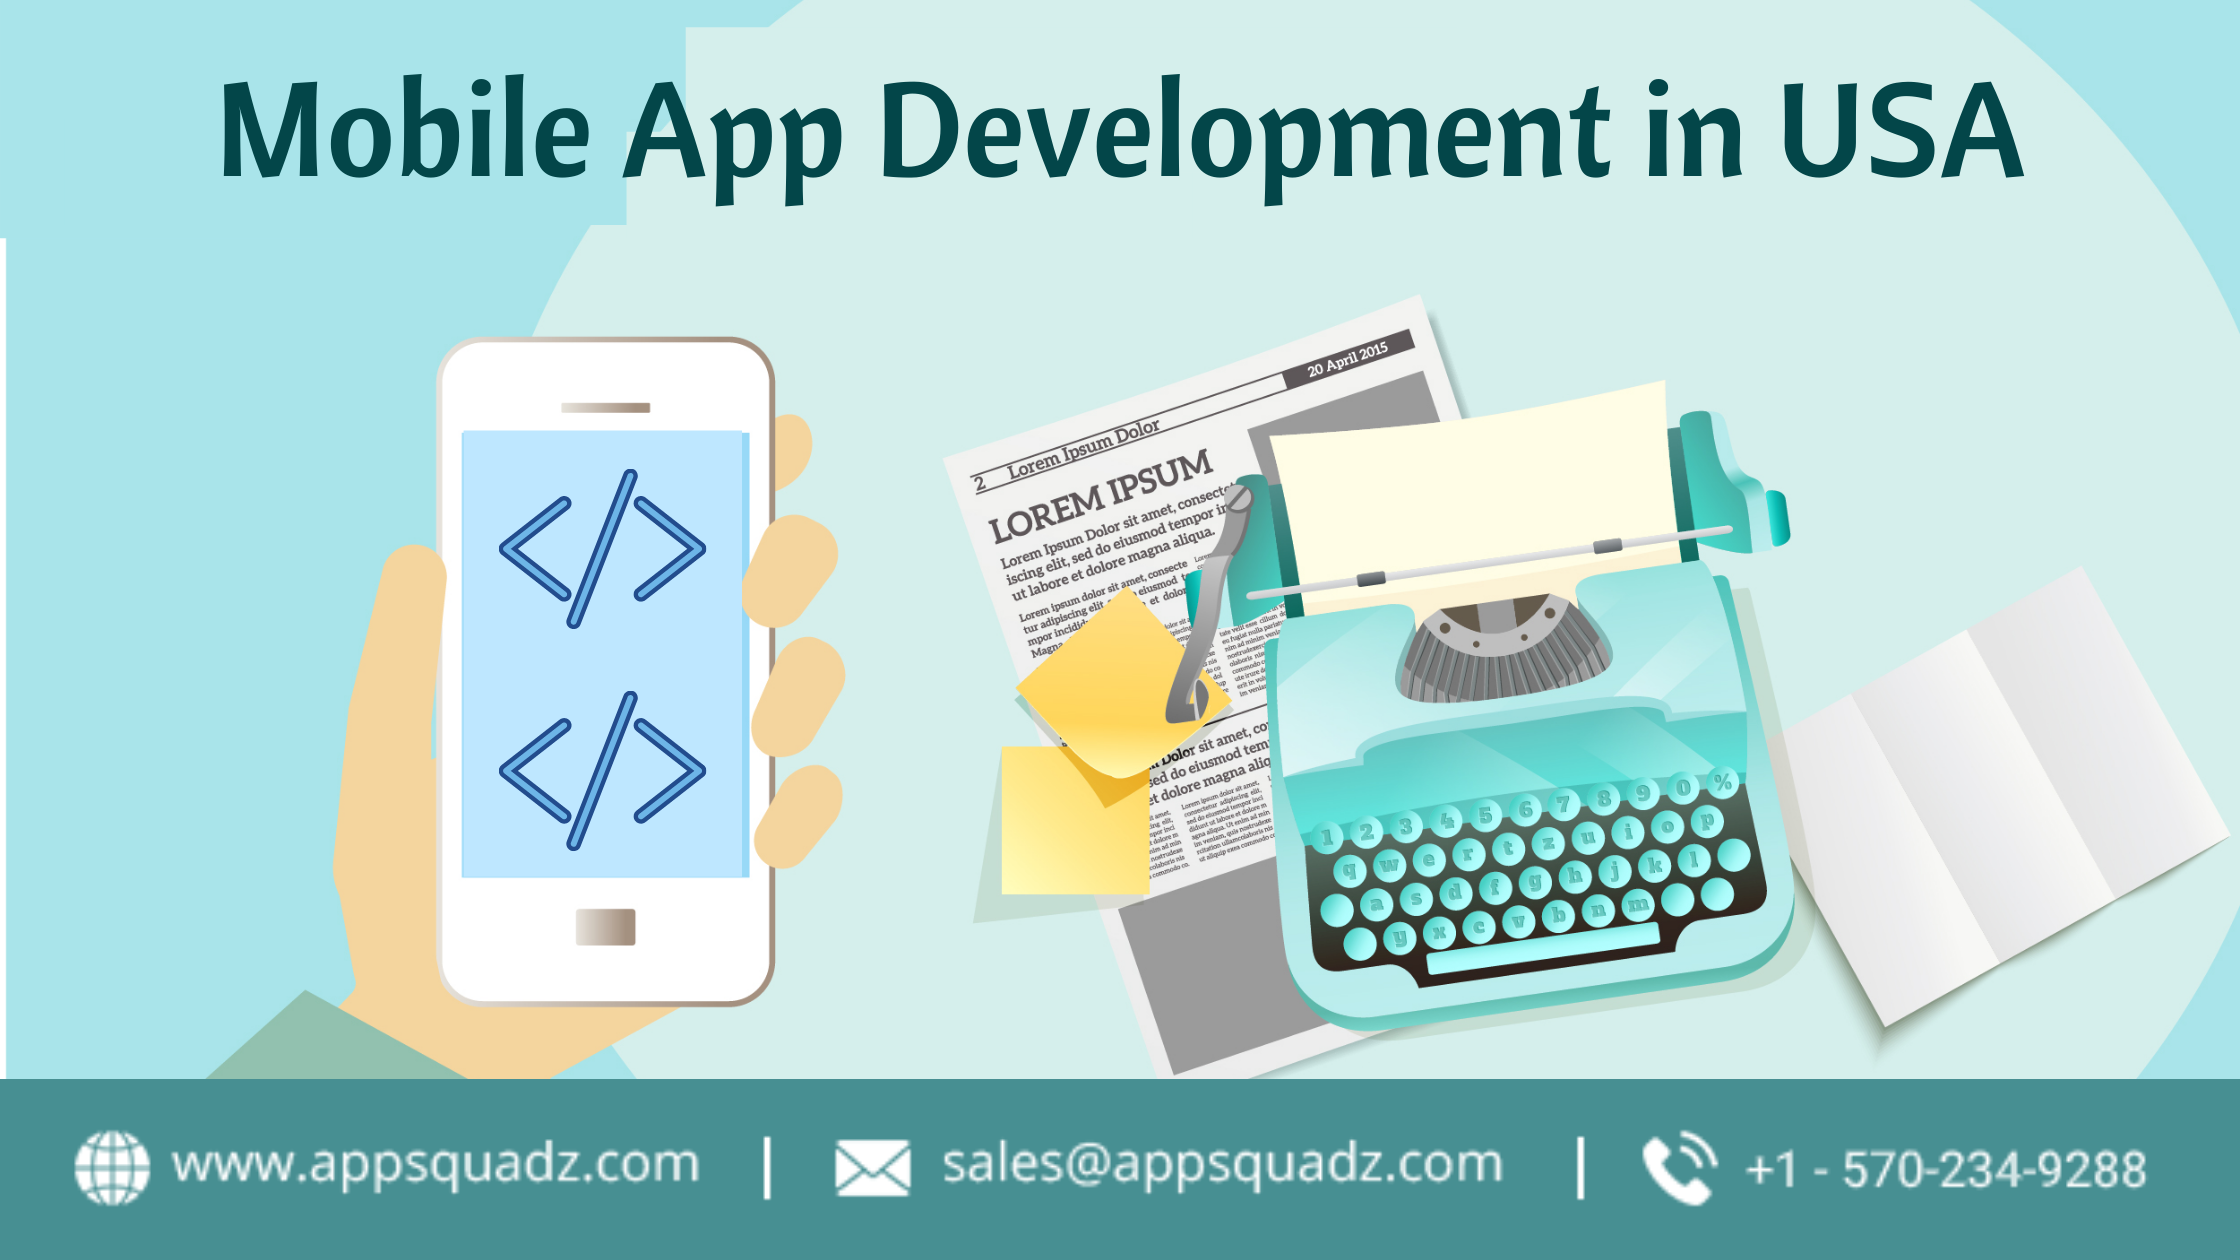 How AppSquadz LLC Become the prominent mobile App Development Company in USA?